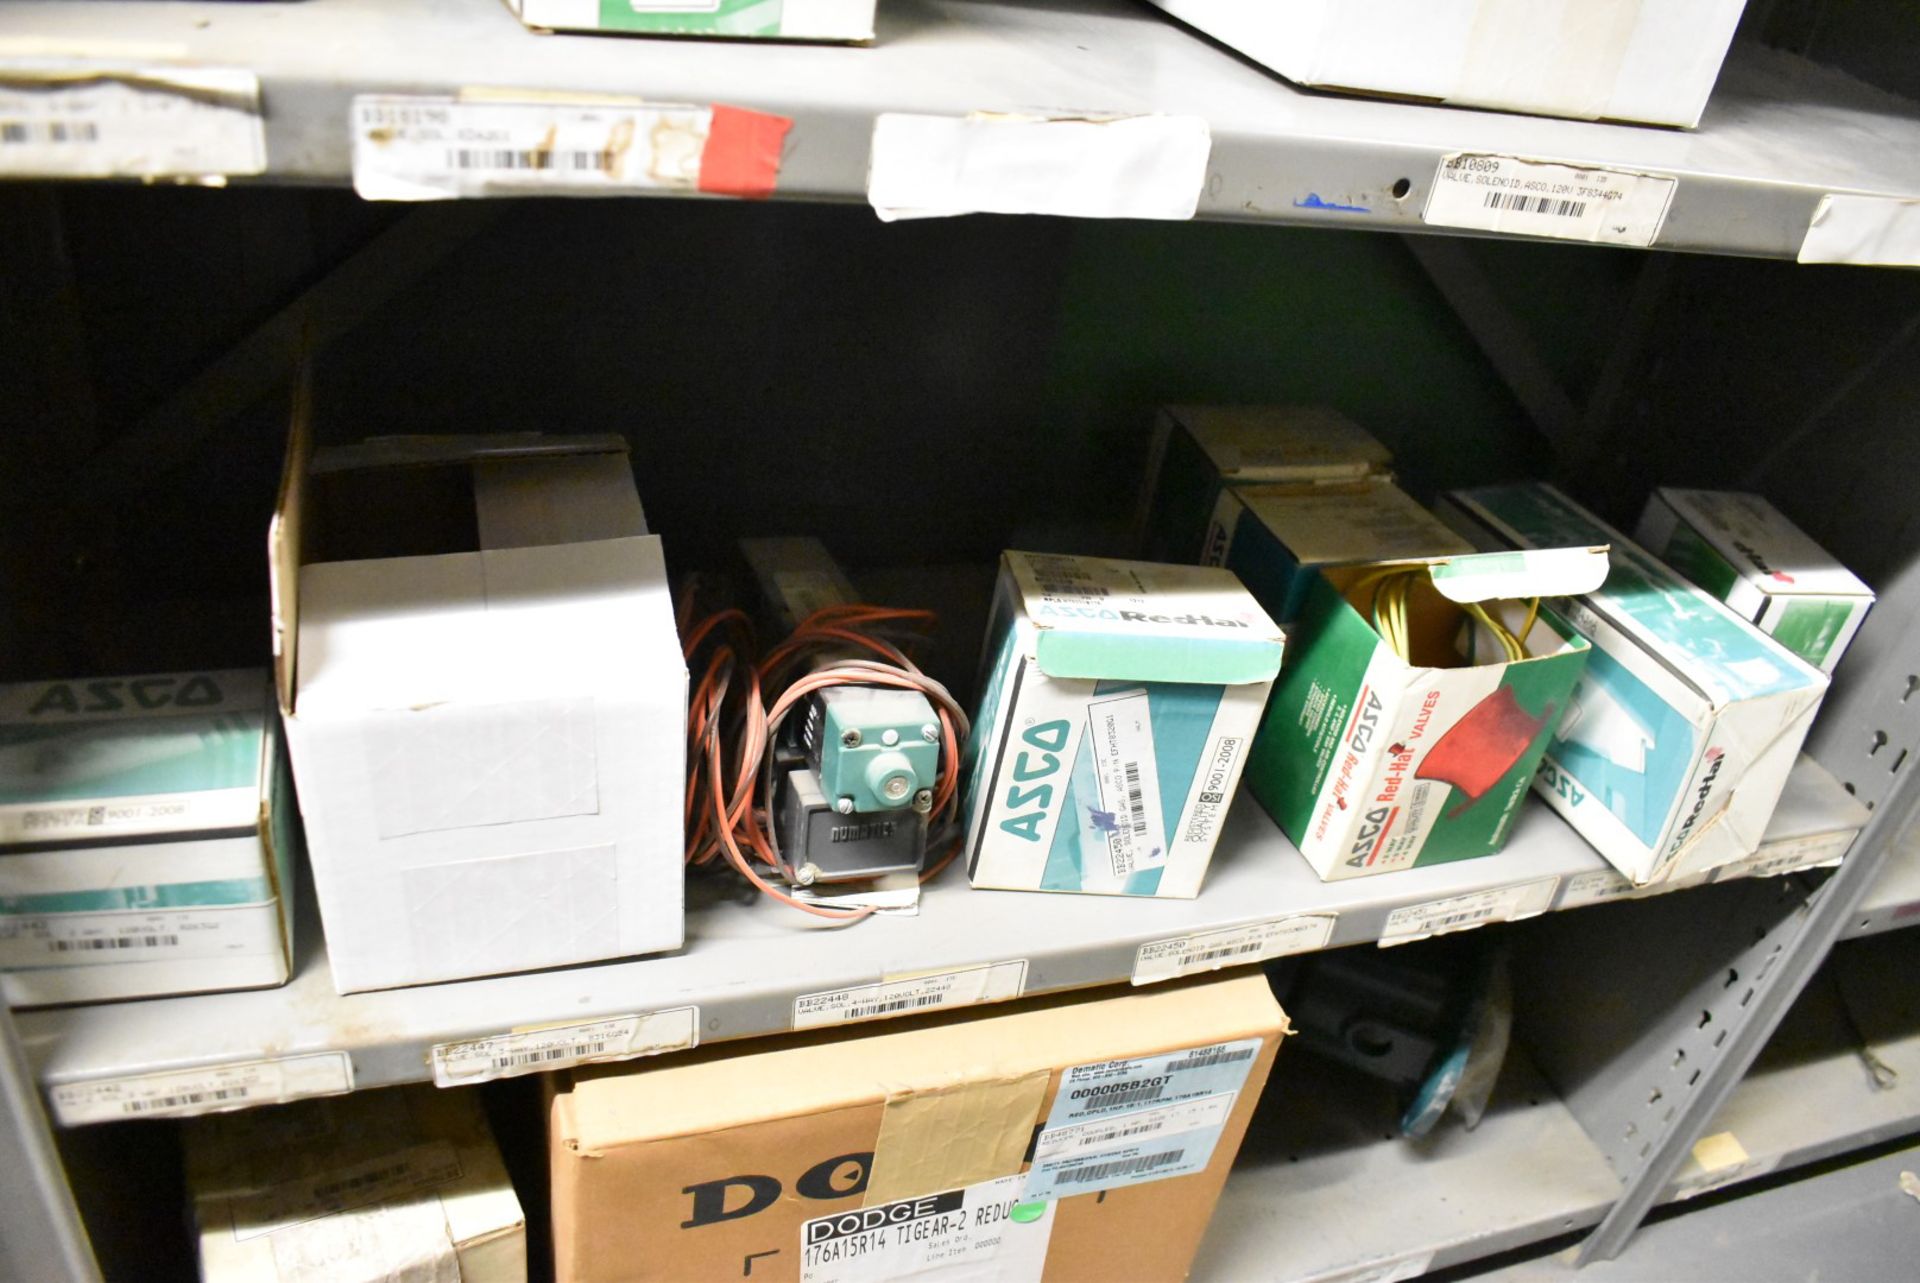 LOT/ CONTENTS OF SHELF - INCLUDING ELECTRICAL CABLE, EMERGENCY LIGHT, ASCO 2-WAY SOLENOID VALVES, - Image 5 of 6